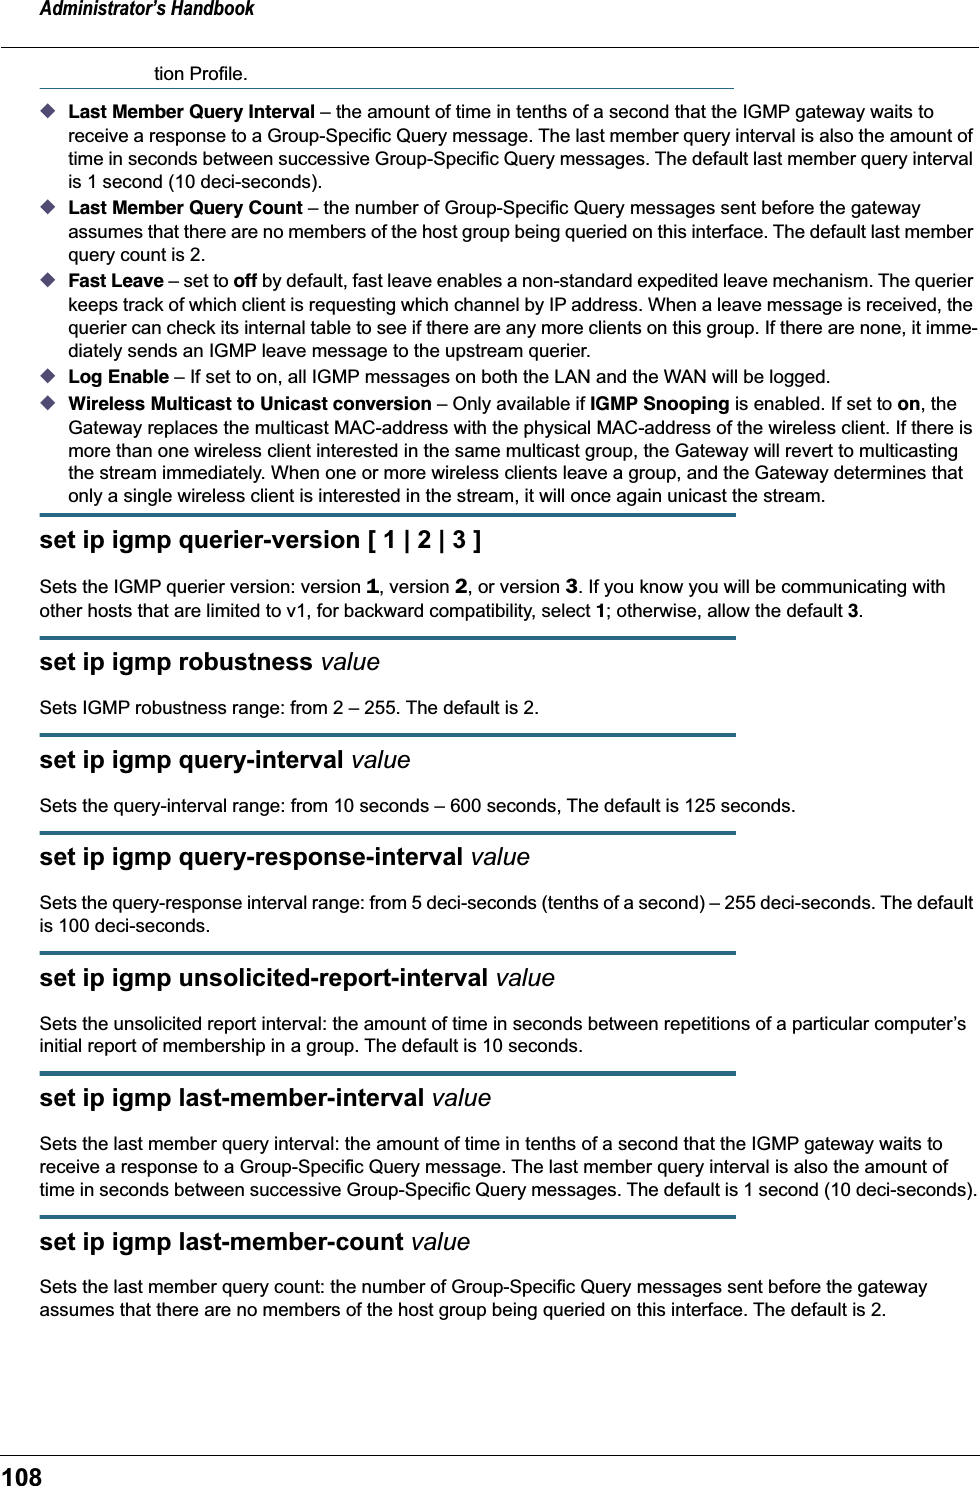 Administrator’s Handbook108tion Profile.◆Last Member Query Interval – the amount of time in tenths of a second that the IGMP gateway waits to receive a response to a Group-Specific Query message. The last member query interval is also the amount of time in seconds between successive Group-Specific Query messages. The default last member query interval is 1 second (10 deci-seconds).◆Last Member Query Count – the number of Group-Specific Query messages sent before the gateway assumes that there are no members of the host group being queried on this interface. The default last member query count is 2.◆Fast Leave – set to off by default, fast leave enables a non-standard expedited leave mechanism. The querier keeps track of which client is requesting which channel by IP address. When a leave message is received, the querier can check its internal table to see if there are any more clients on this group. If there are none, it imme-diately sends an IGMP leave message to the upstream querier.◆Log Enable – If set to on, all IGMP messages on both the LAN and the WAN will be logged.◆Wireless Multicast to Unicast conversion – Only available if IGMP Snooping is enabled. If set to on, the Gateway replaces the multicast MAC-address with the physical MAC-address of the wireless client. If there is more than one wireless client interested in the same multicast group, the Gateway will revert to multicasting the stream immediately. When one or more wireless clients leave a group, and the Gateway determines that only a single wireless client is interested in the stream, it will once again unicast the stream.set ip igmp querier-version [ 1 | 2 | 3 ]Sets the IGMP querier version: version 1, version 2, or version 3. If you know you will be communicating with other hosts that are limited to v1, for backward compatibility, select 1; otherwise, allow the default 3.set ip igmp robustness valueSets IGMP robustness range: from 2 – 255. The default is 2.set ip igmp query-interval valueSets the query-interval range: from 10 seconds – 600 seconds, The default is 125 seconds.set ip igmp query-response-interval valueSets the query-response interval range: from 5 deci-seconds (tenths of a second) – 255 deci-seconds. The default is 100 deci-seconds.set ip igmp unsolicited-report-interval valueSets the unsolicited report interval: the amount of time in seconds between repetitions of a particular computer’s initial report of membership in a group. The default is 10 seconds.set ip igmp last-member-interval valueSets the last member query interval: the amount of time in tenths of a second that the IGMP gateway waits to receive a response to a Group-Specific Query message. The last member query interval is also the amount of time in seconds between successive Group-Specific Query messages. The default is 1 second (10 deci-seconds).set ip igmp last-member-count valueSets the last member query count: the number of Group-Specific Query messages sent before the gateway assumes that there are no members of the host group being queried on this interface. The default is 2.